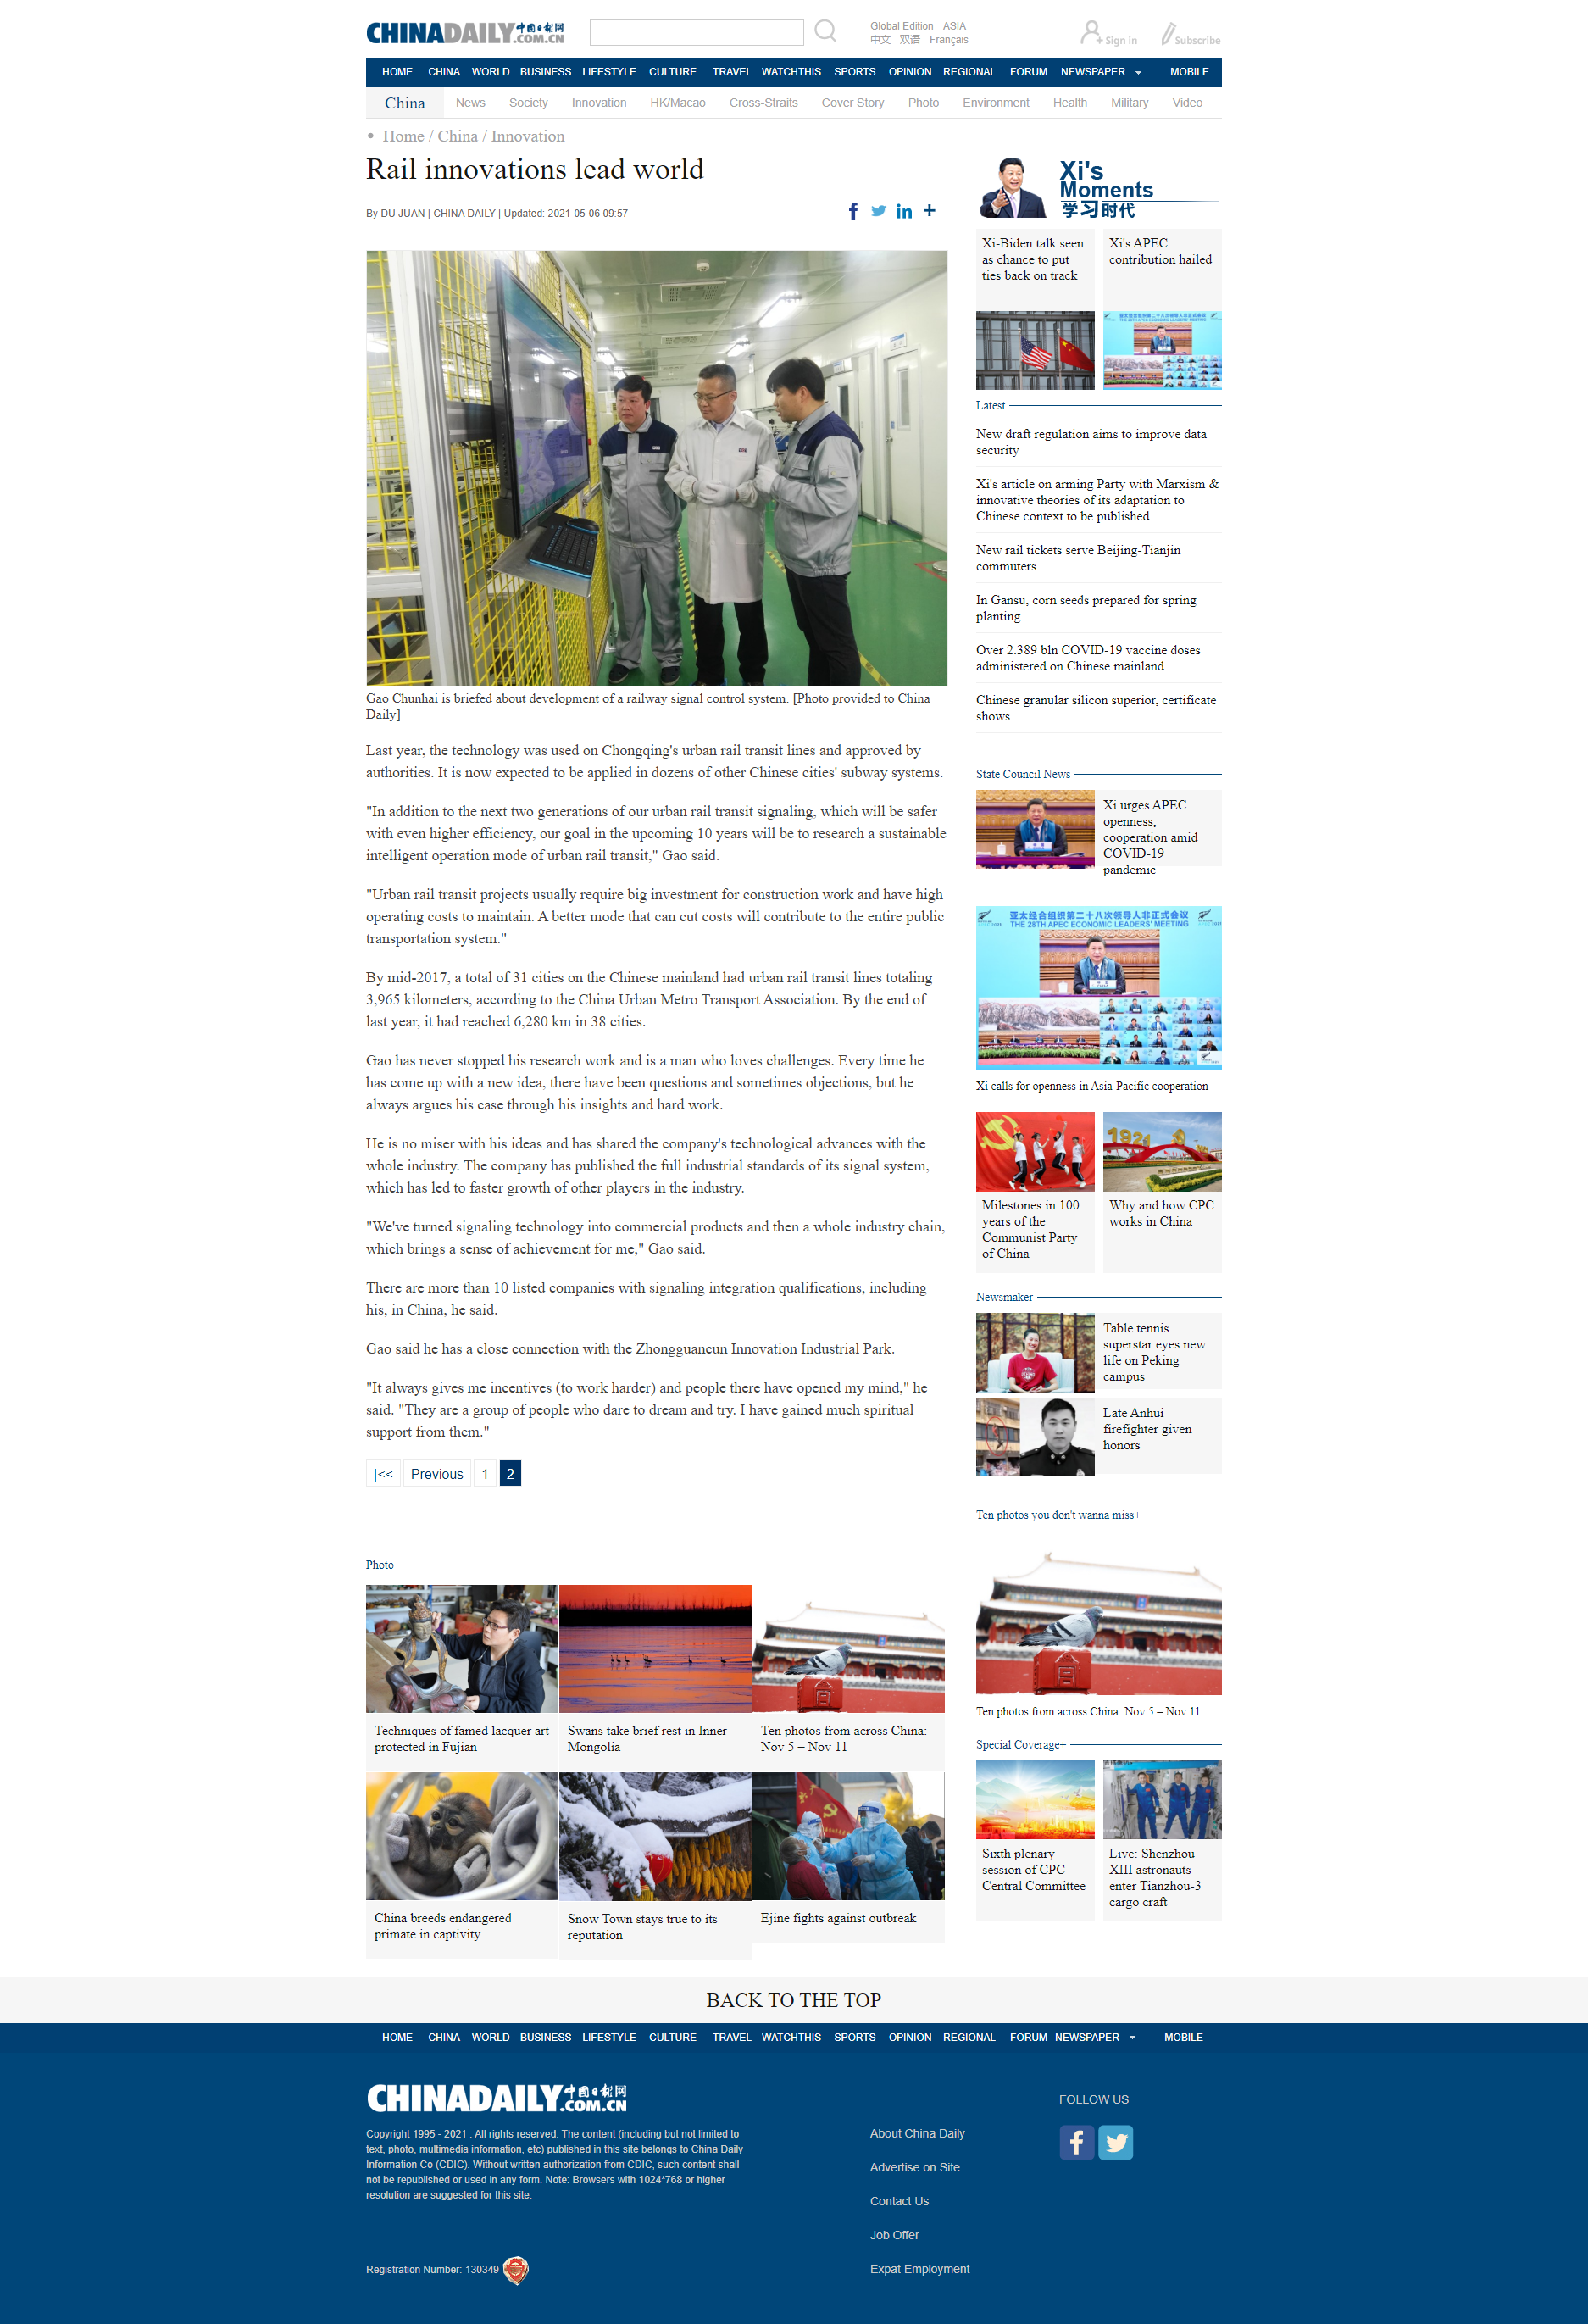 Rail innovations lead world - Chinadaily.com.cn-2.png